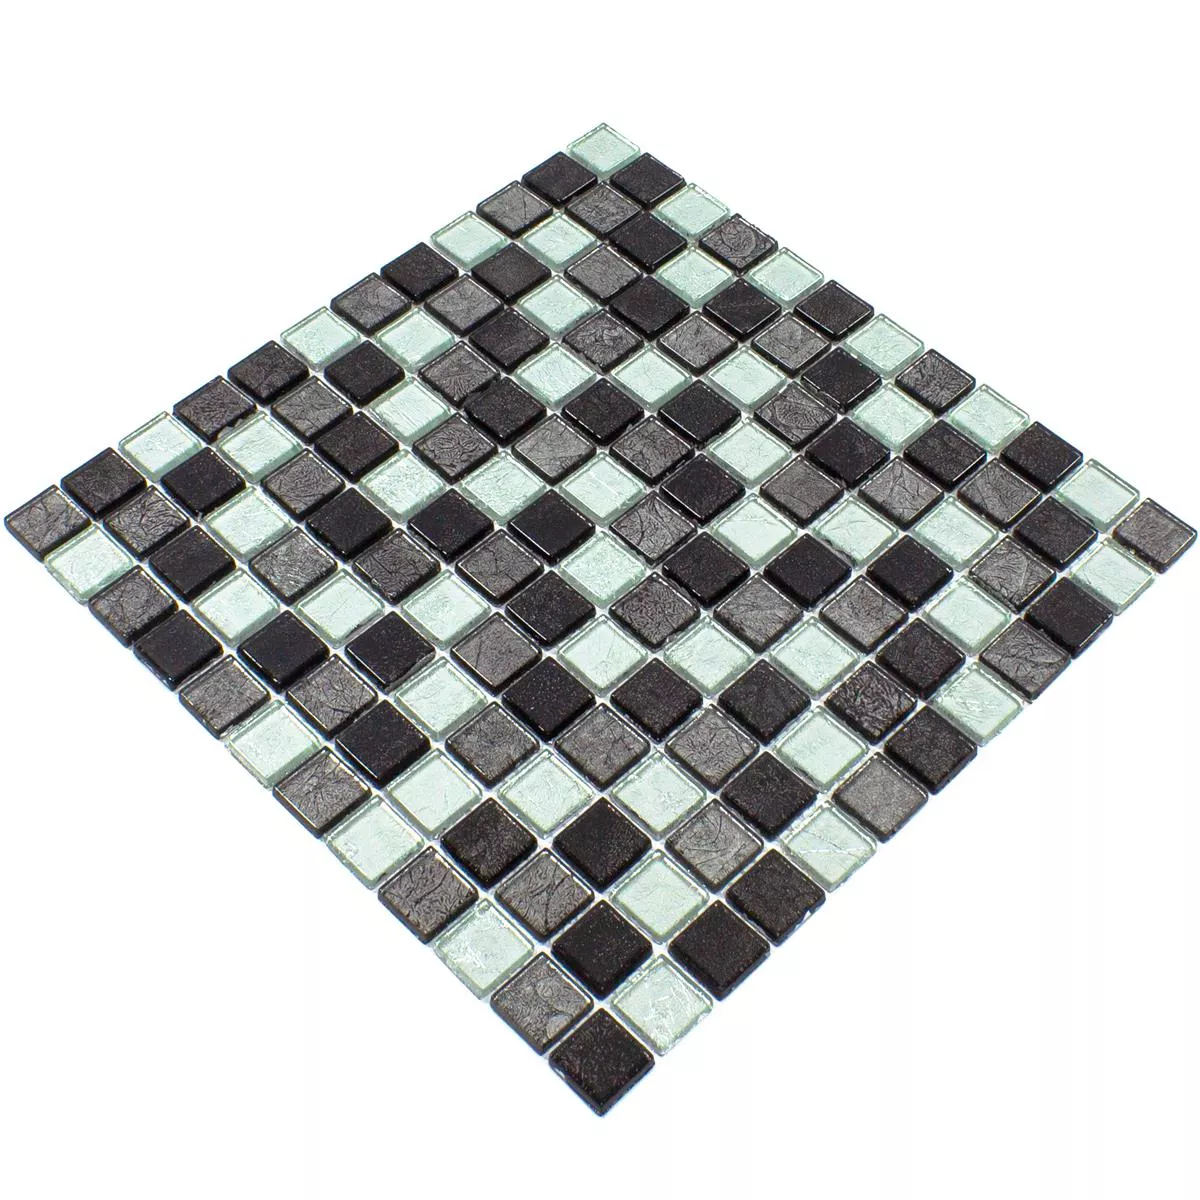 Mosaic Tiles Glass Bonnie Crystal Structure Black Silver Grey